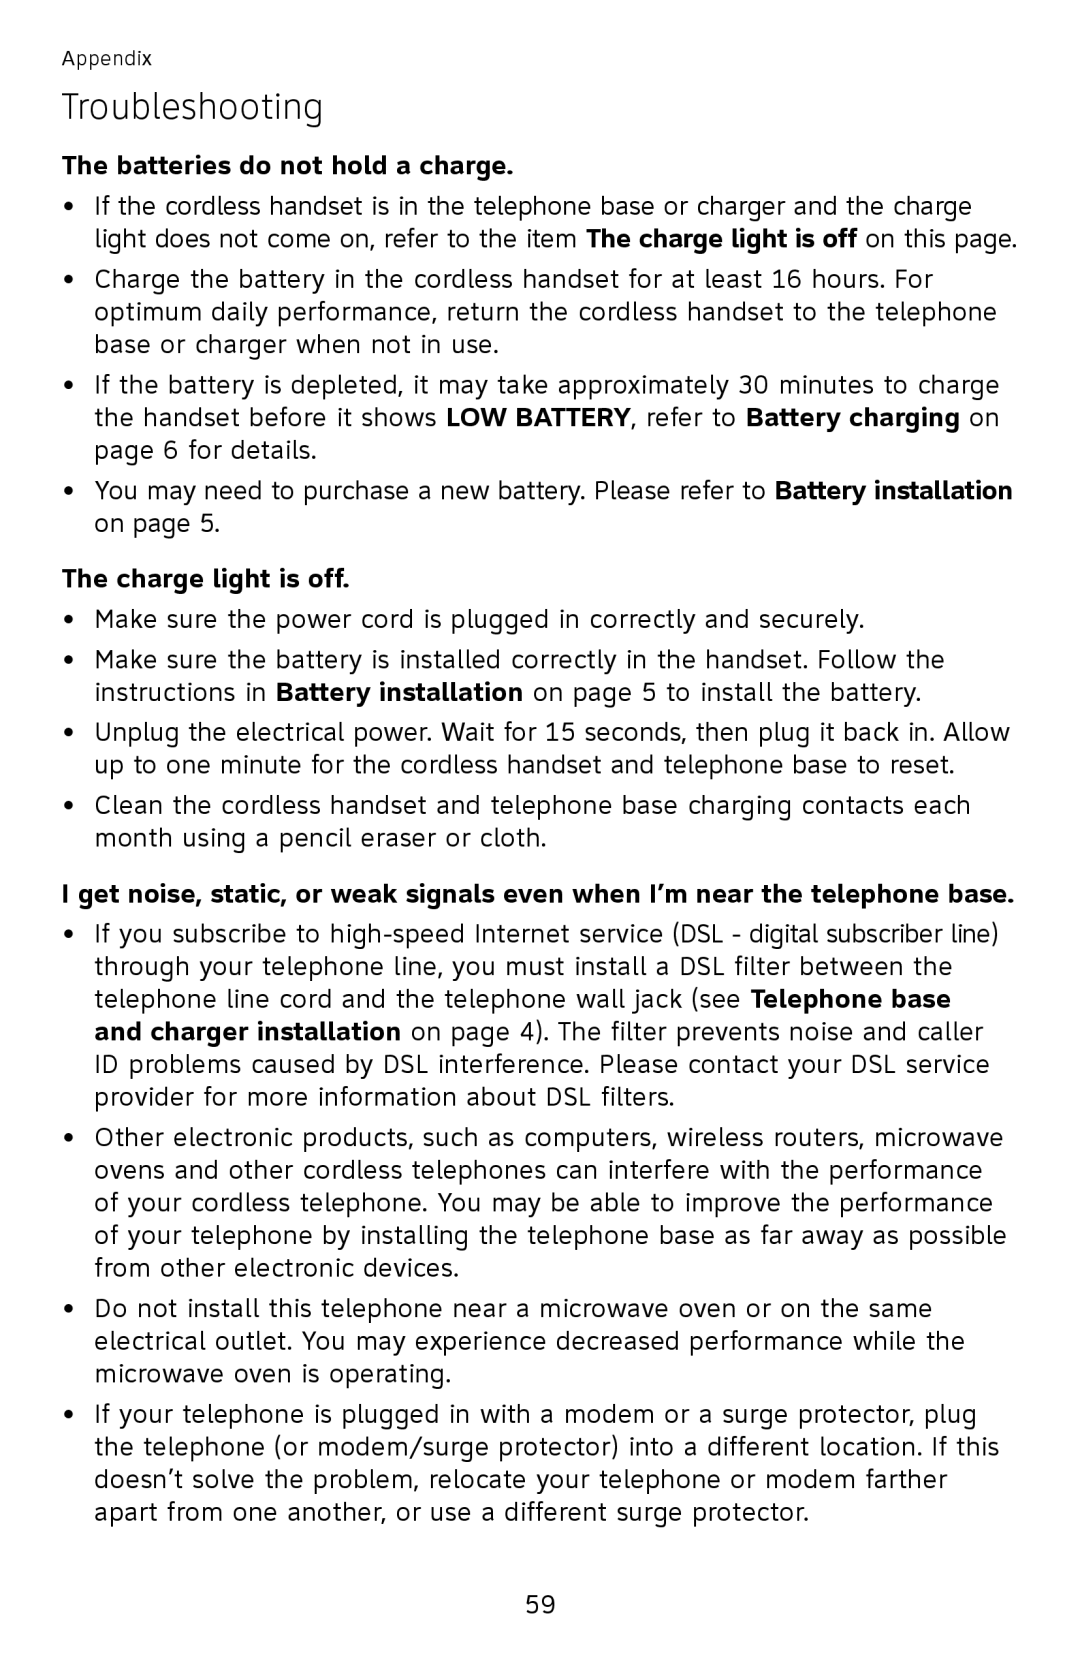 AT&T EL52500, EL52510, EL52450, EL52350, EL52300 The batteries do not hold a charge, The charge light is off, Troubleshooting 